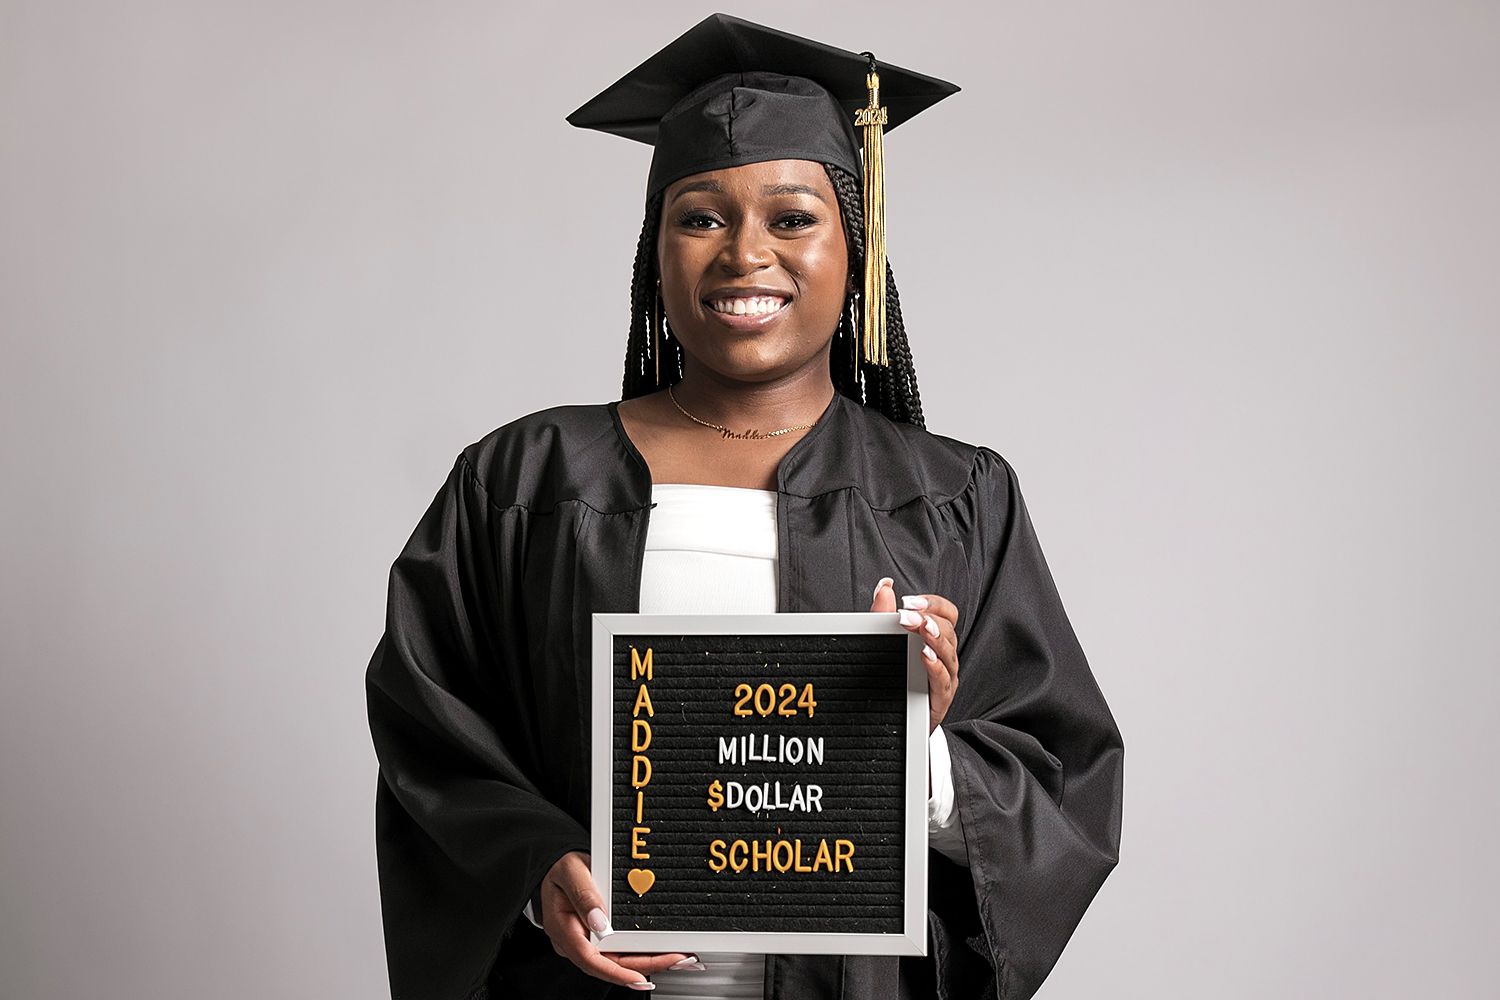 High Schooler Accepted into 231 Schools, Awarded Millions in Scholarships [Video]